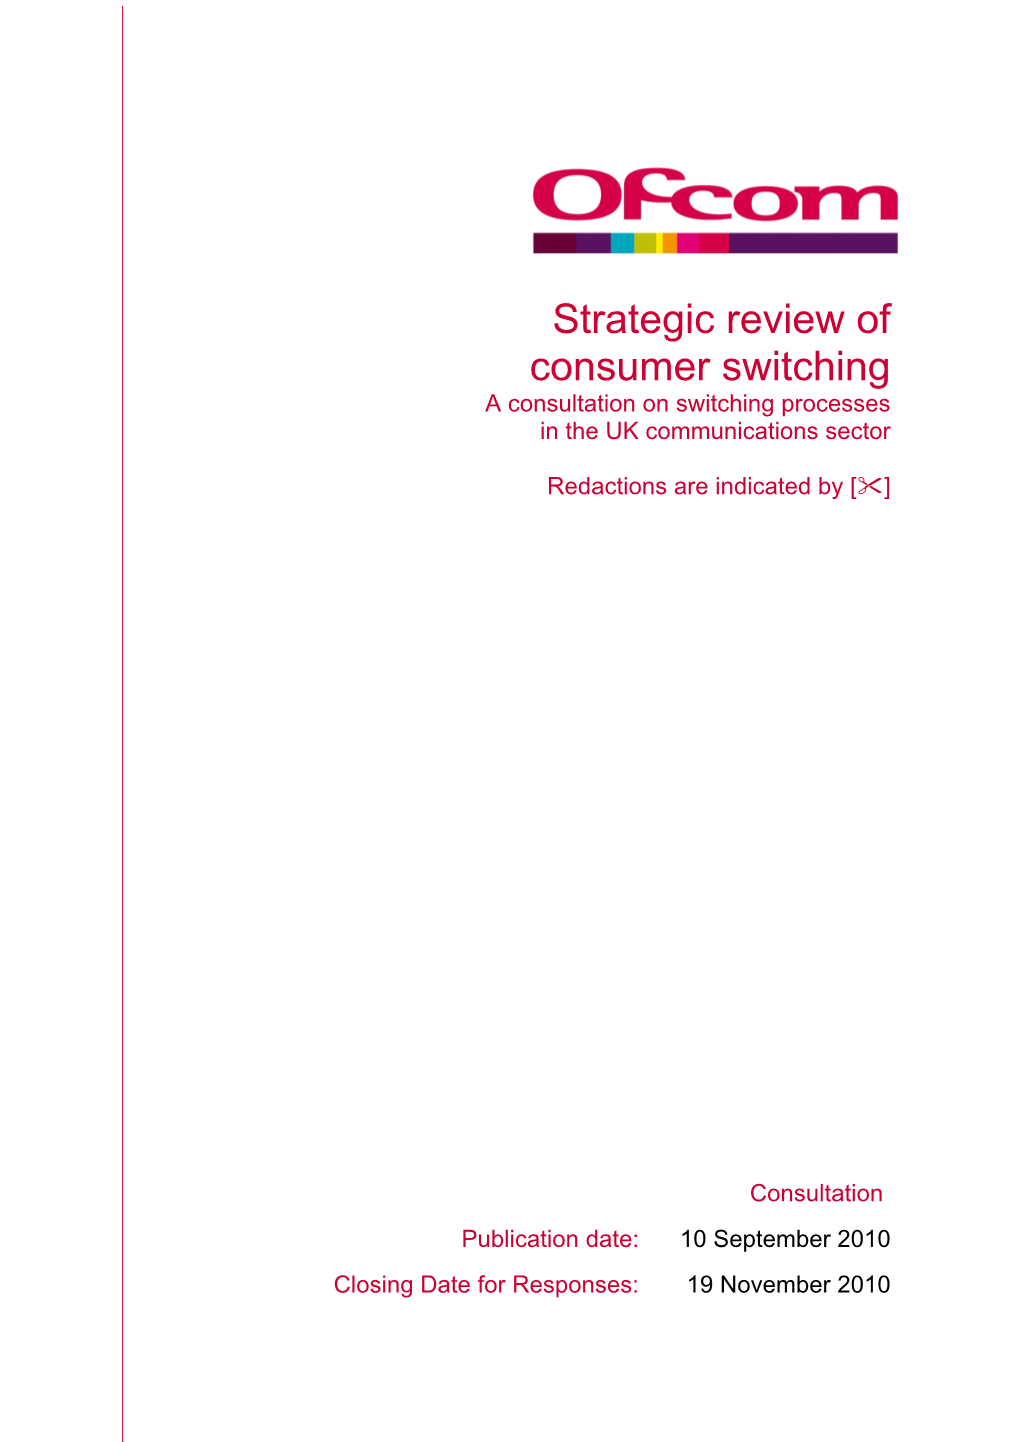 Strategic Review of Consumer Switching a Consultation on Switching Processes in the UK Communications Sector